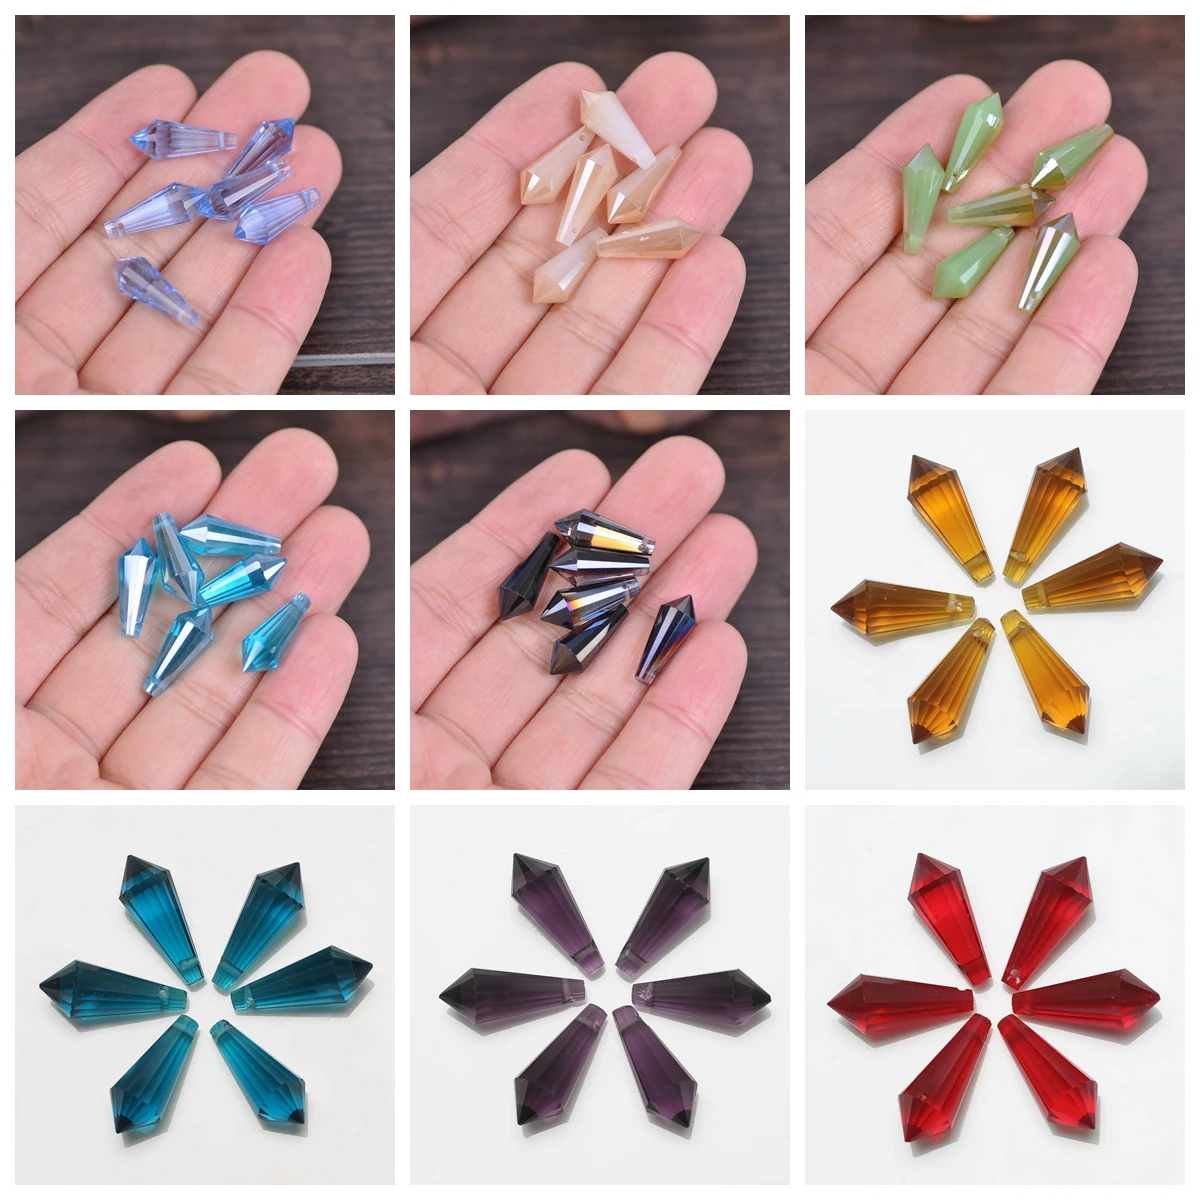 8x20mm Teardrop Bicone Prism Faceted Crystal Glass Loose Crafts Pendants Beads Lot For DIY Jewelry Making Findings |